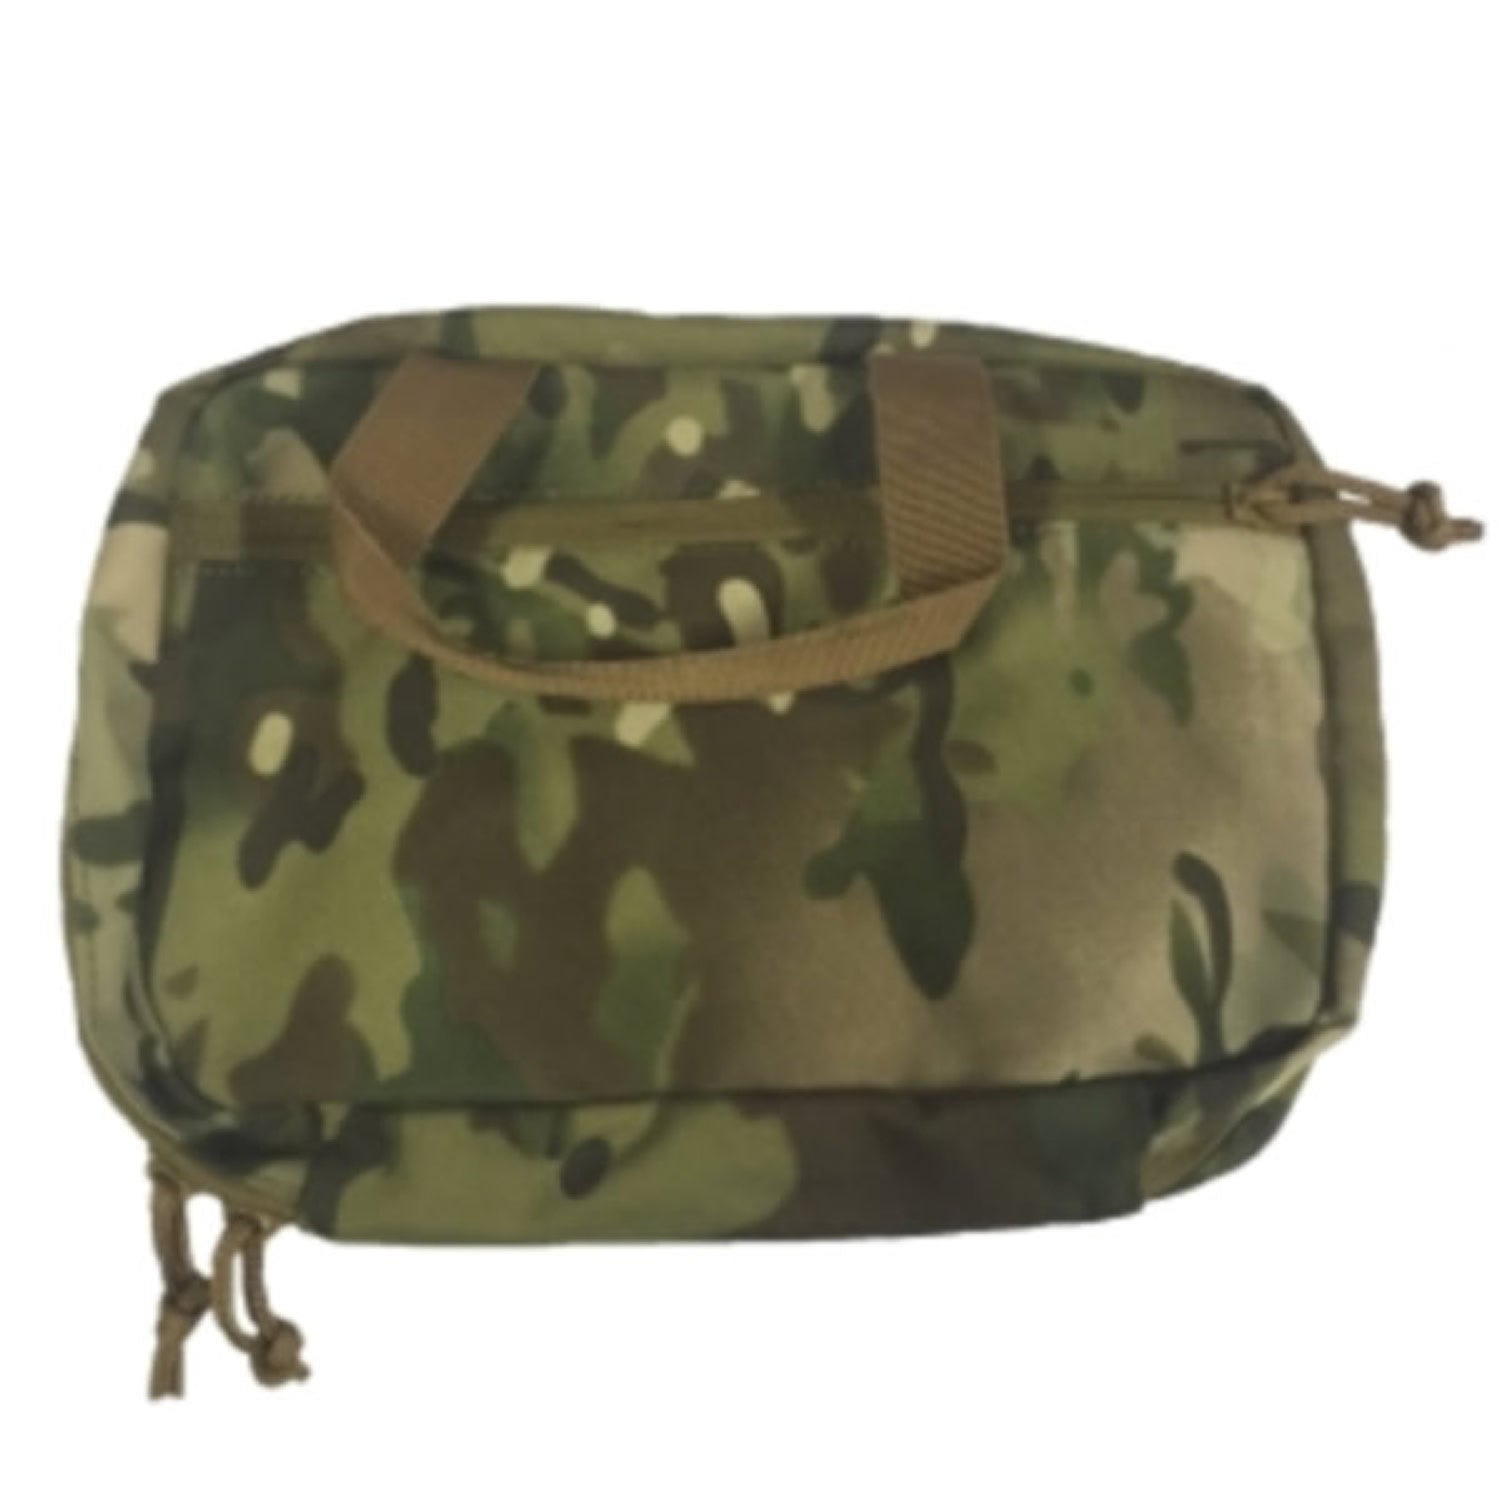 Great for military, cadets, camping and hiking to keep all your personal hygiene requirements together in one pouch  It folds up into a small pouch for travel and storage and can be hung vertically on a tree branch or hootchie cord when in the field so this way you can use the mirror when shaving or putting camo paint on.